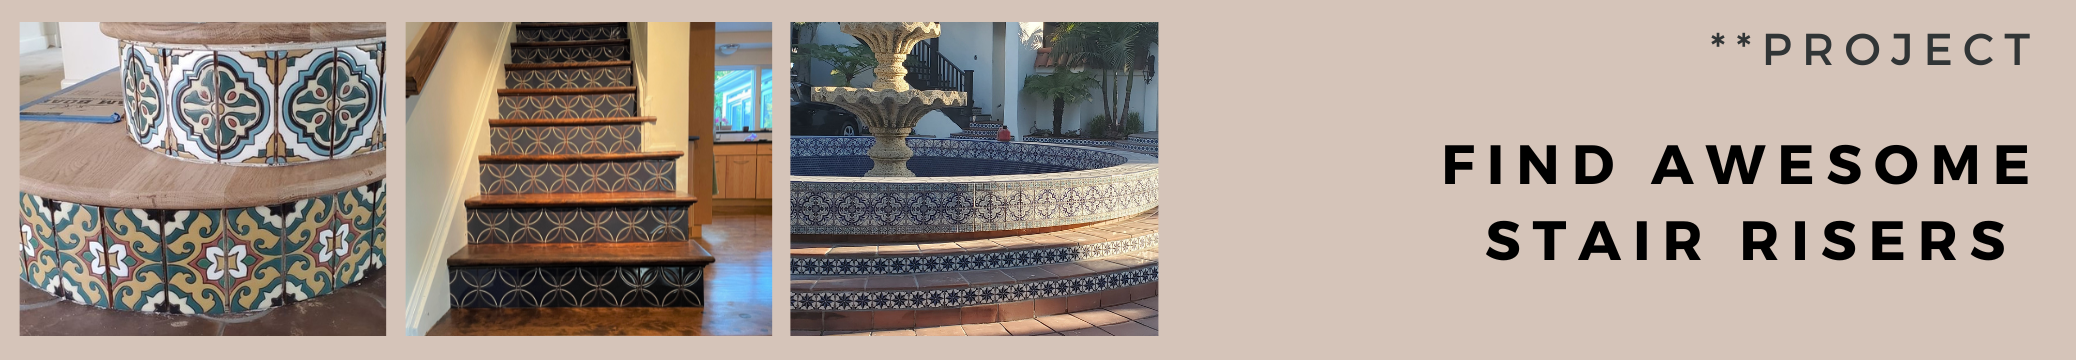 Three types of risers - Spanish tiles, modern tiles and outdoor tiles